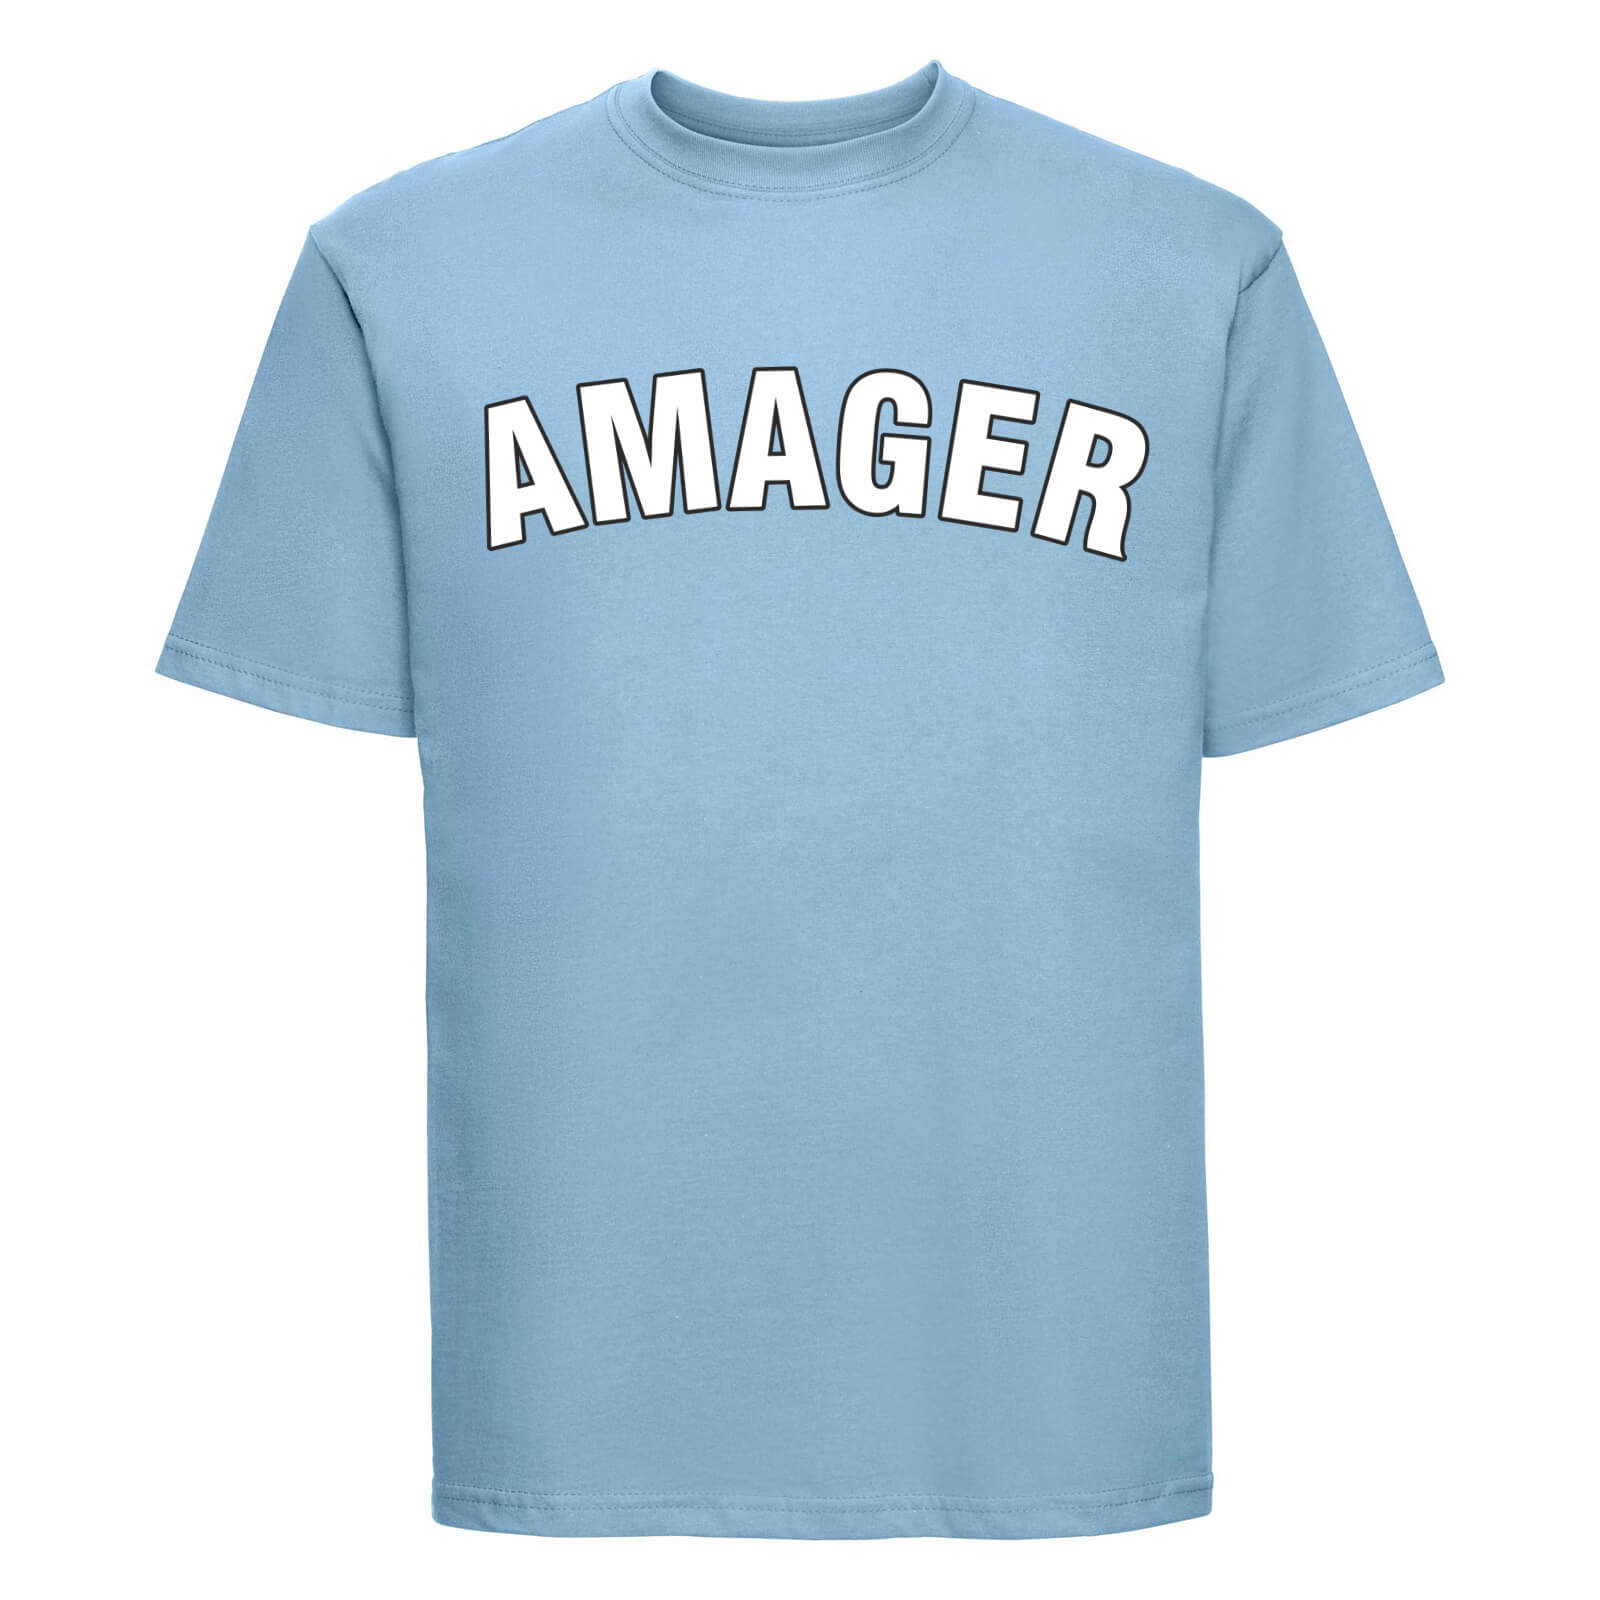 Amager Collection T-shirt Turkis Ama'r